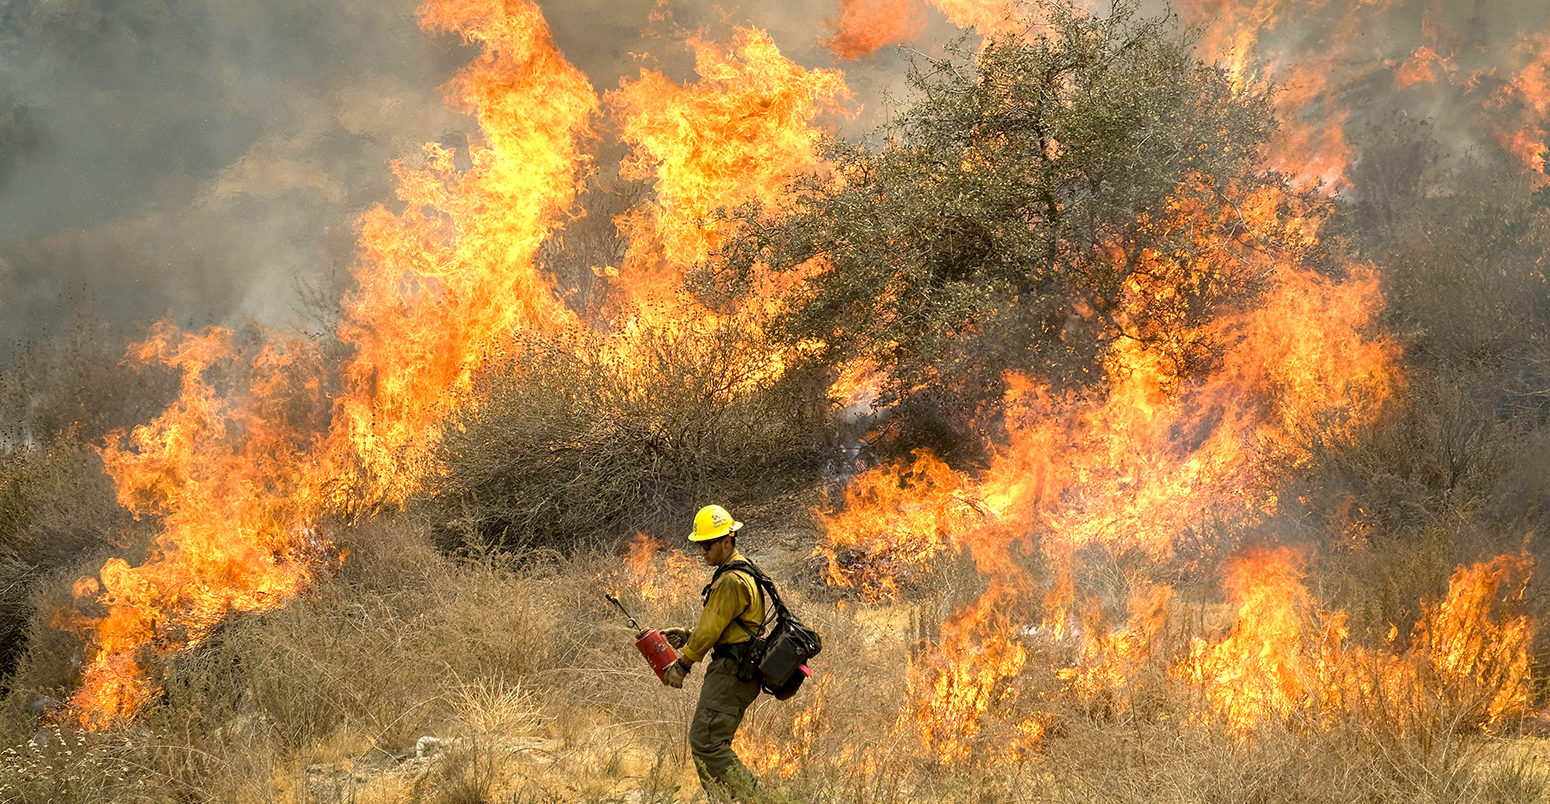 Firefighters battle the Holy Fire burning in the Cleveland National Forest, Los Angeles, California, 10 August 2018. ZUMA Press, Inc. / Alamy Stock Photo. PDXJ0A